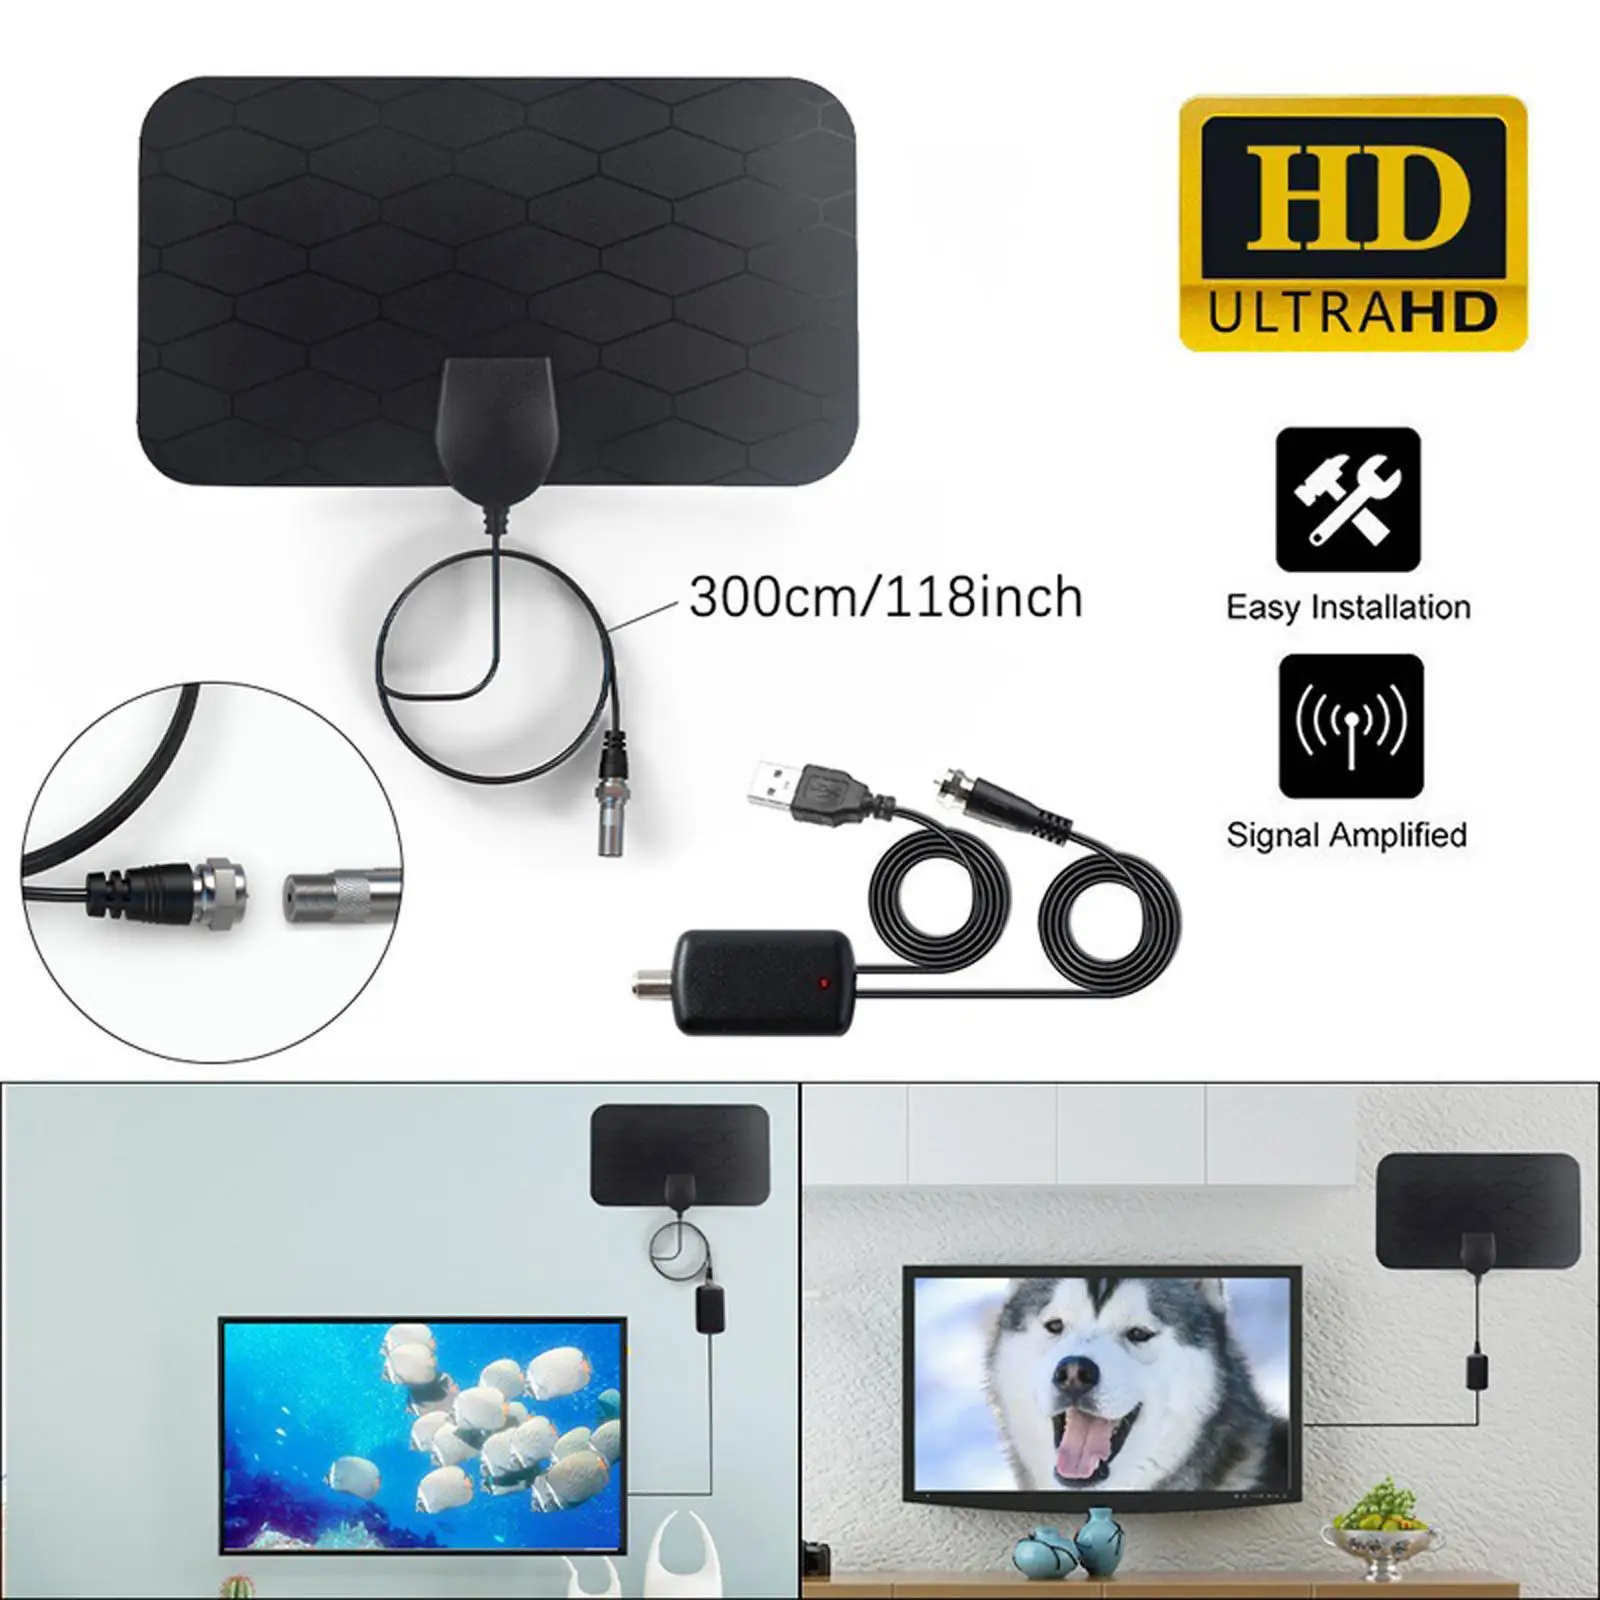 Digital TV Antenna Clear Picture smart HDTV Antenna Signal Booster